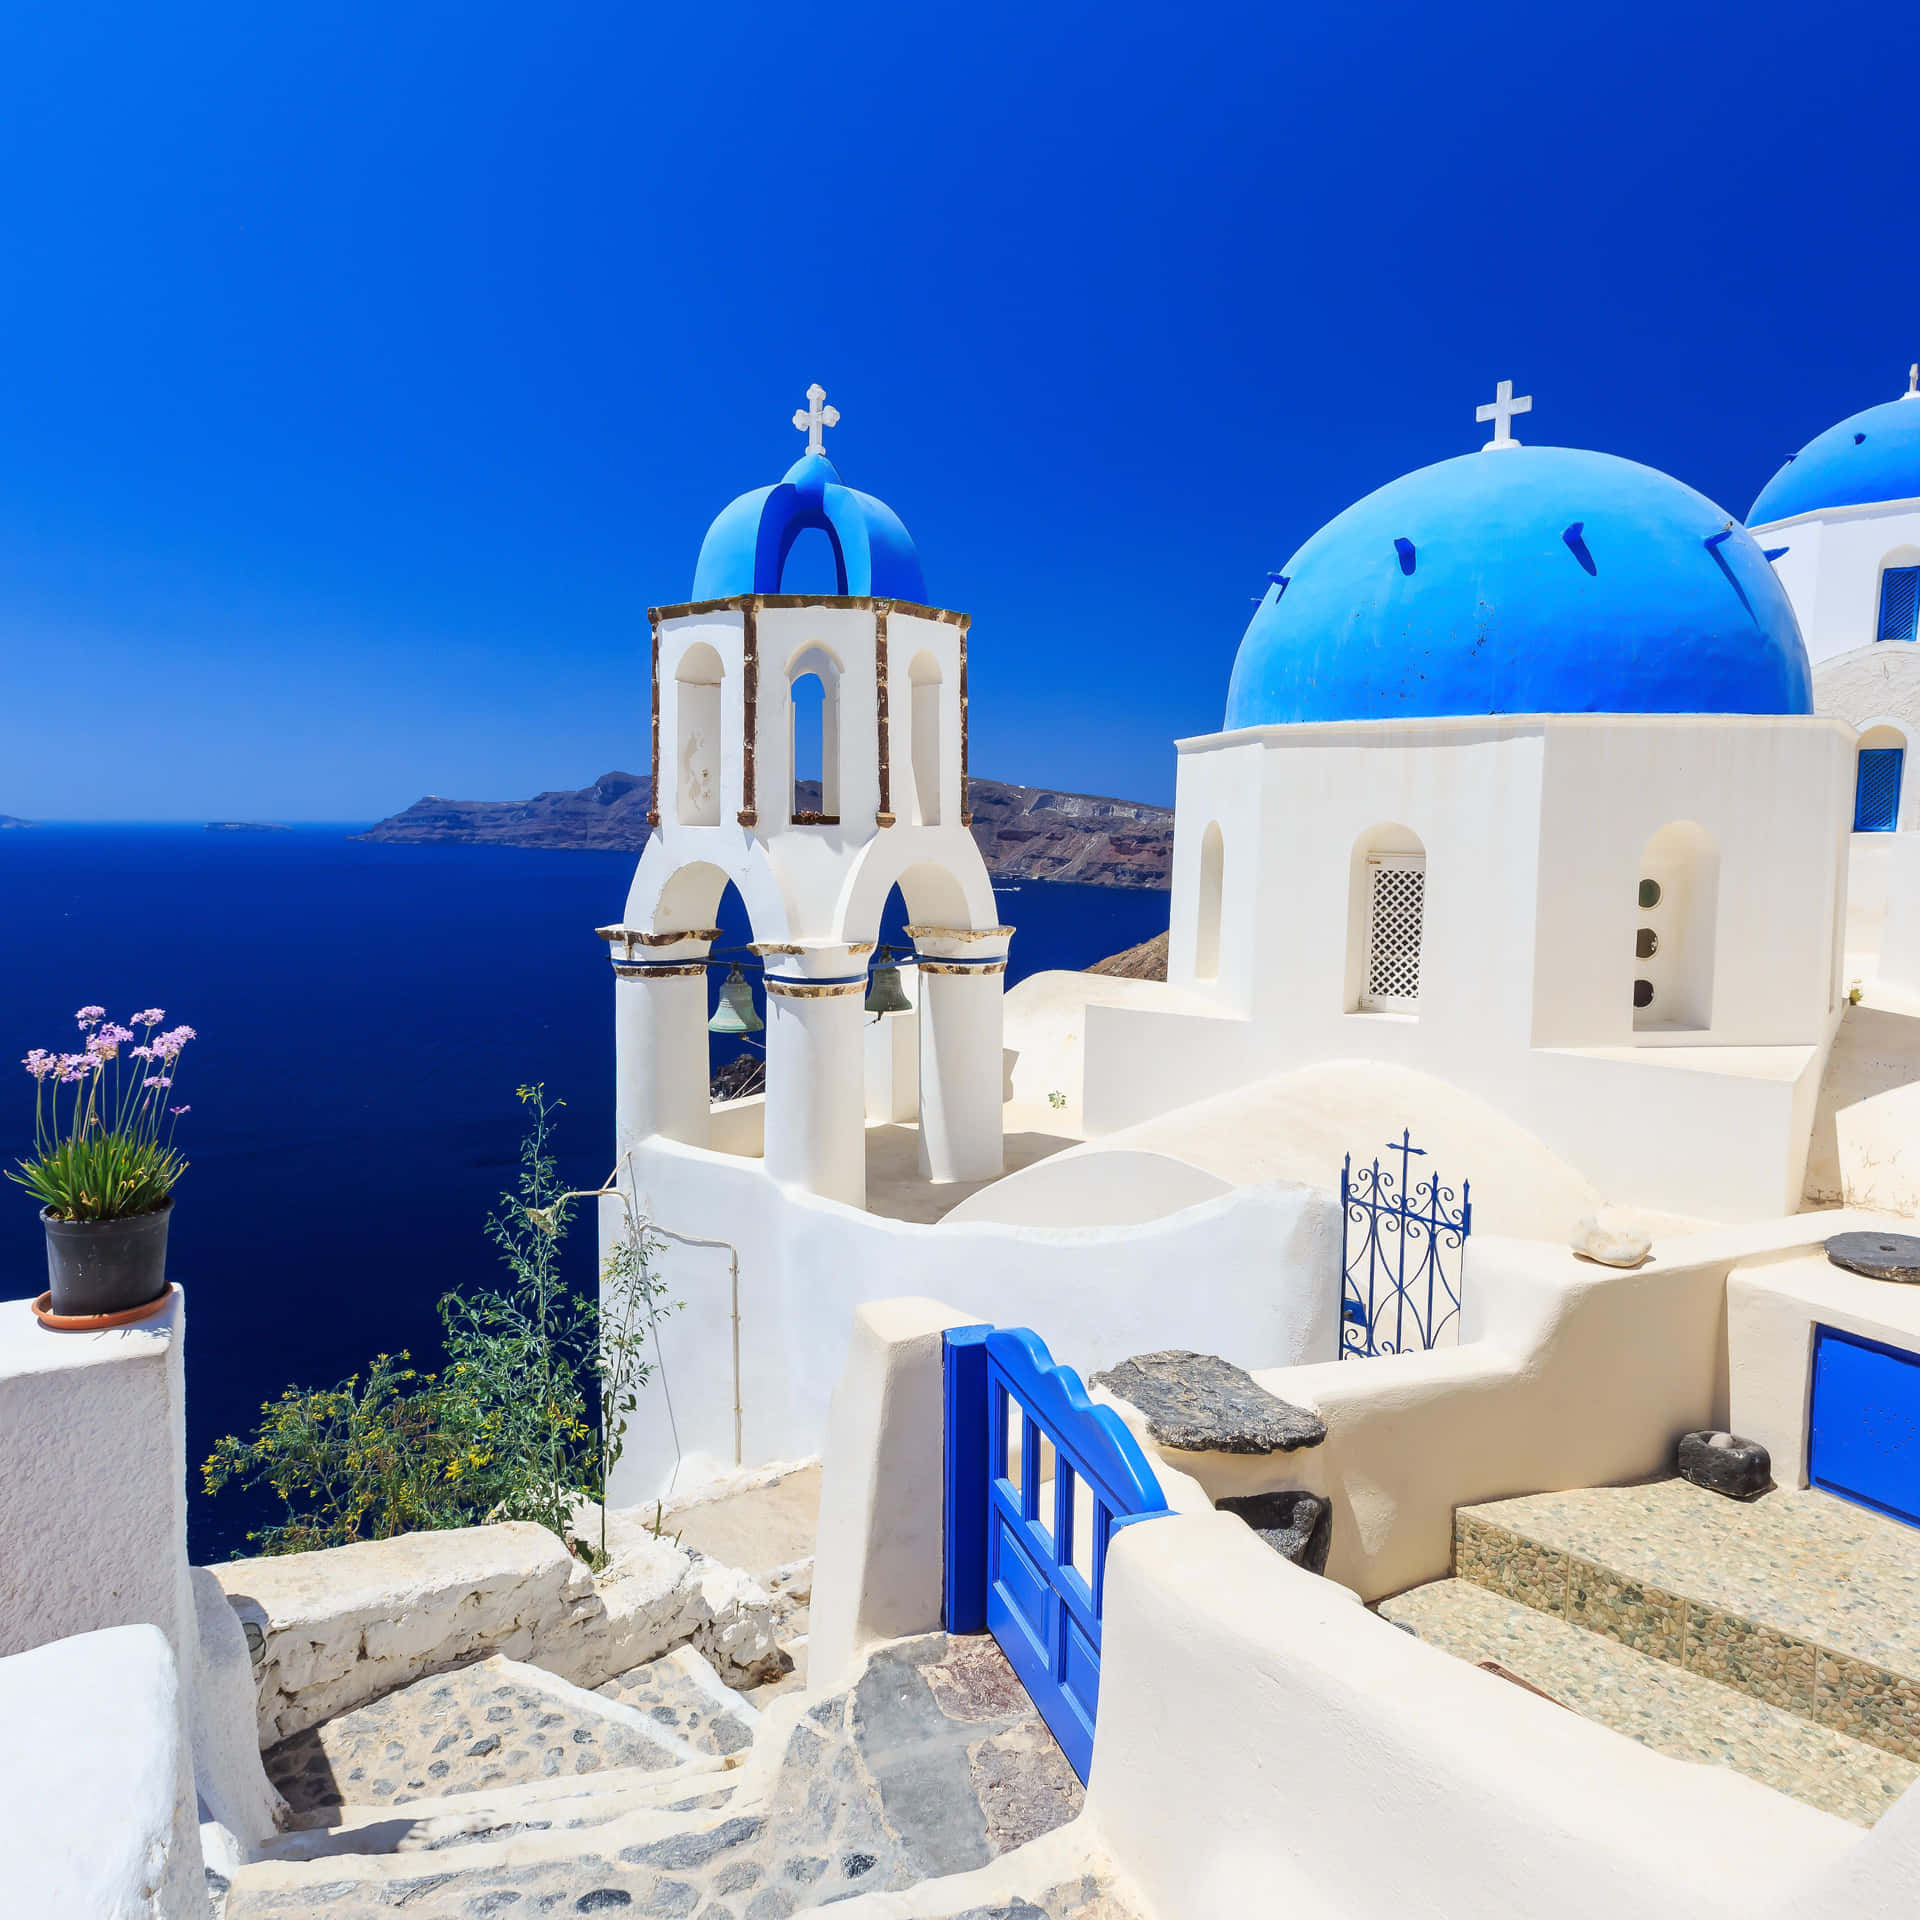 Sail and explore the stunning seaside of Greece